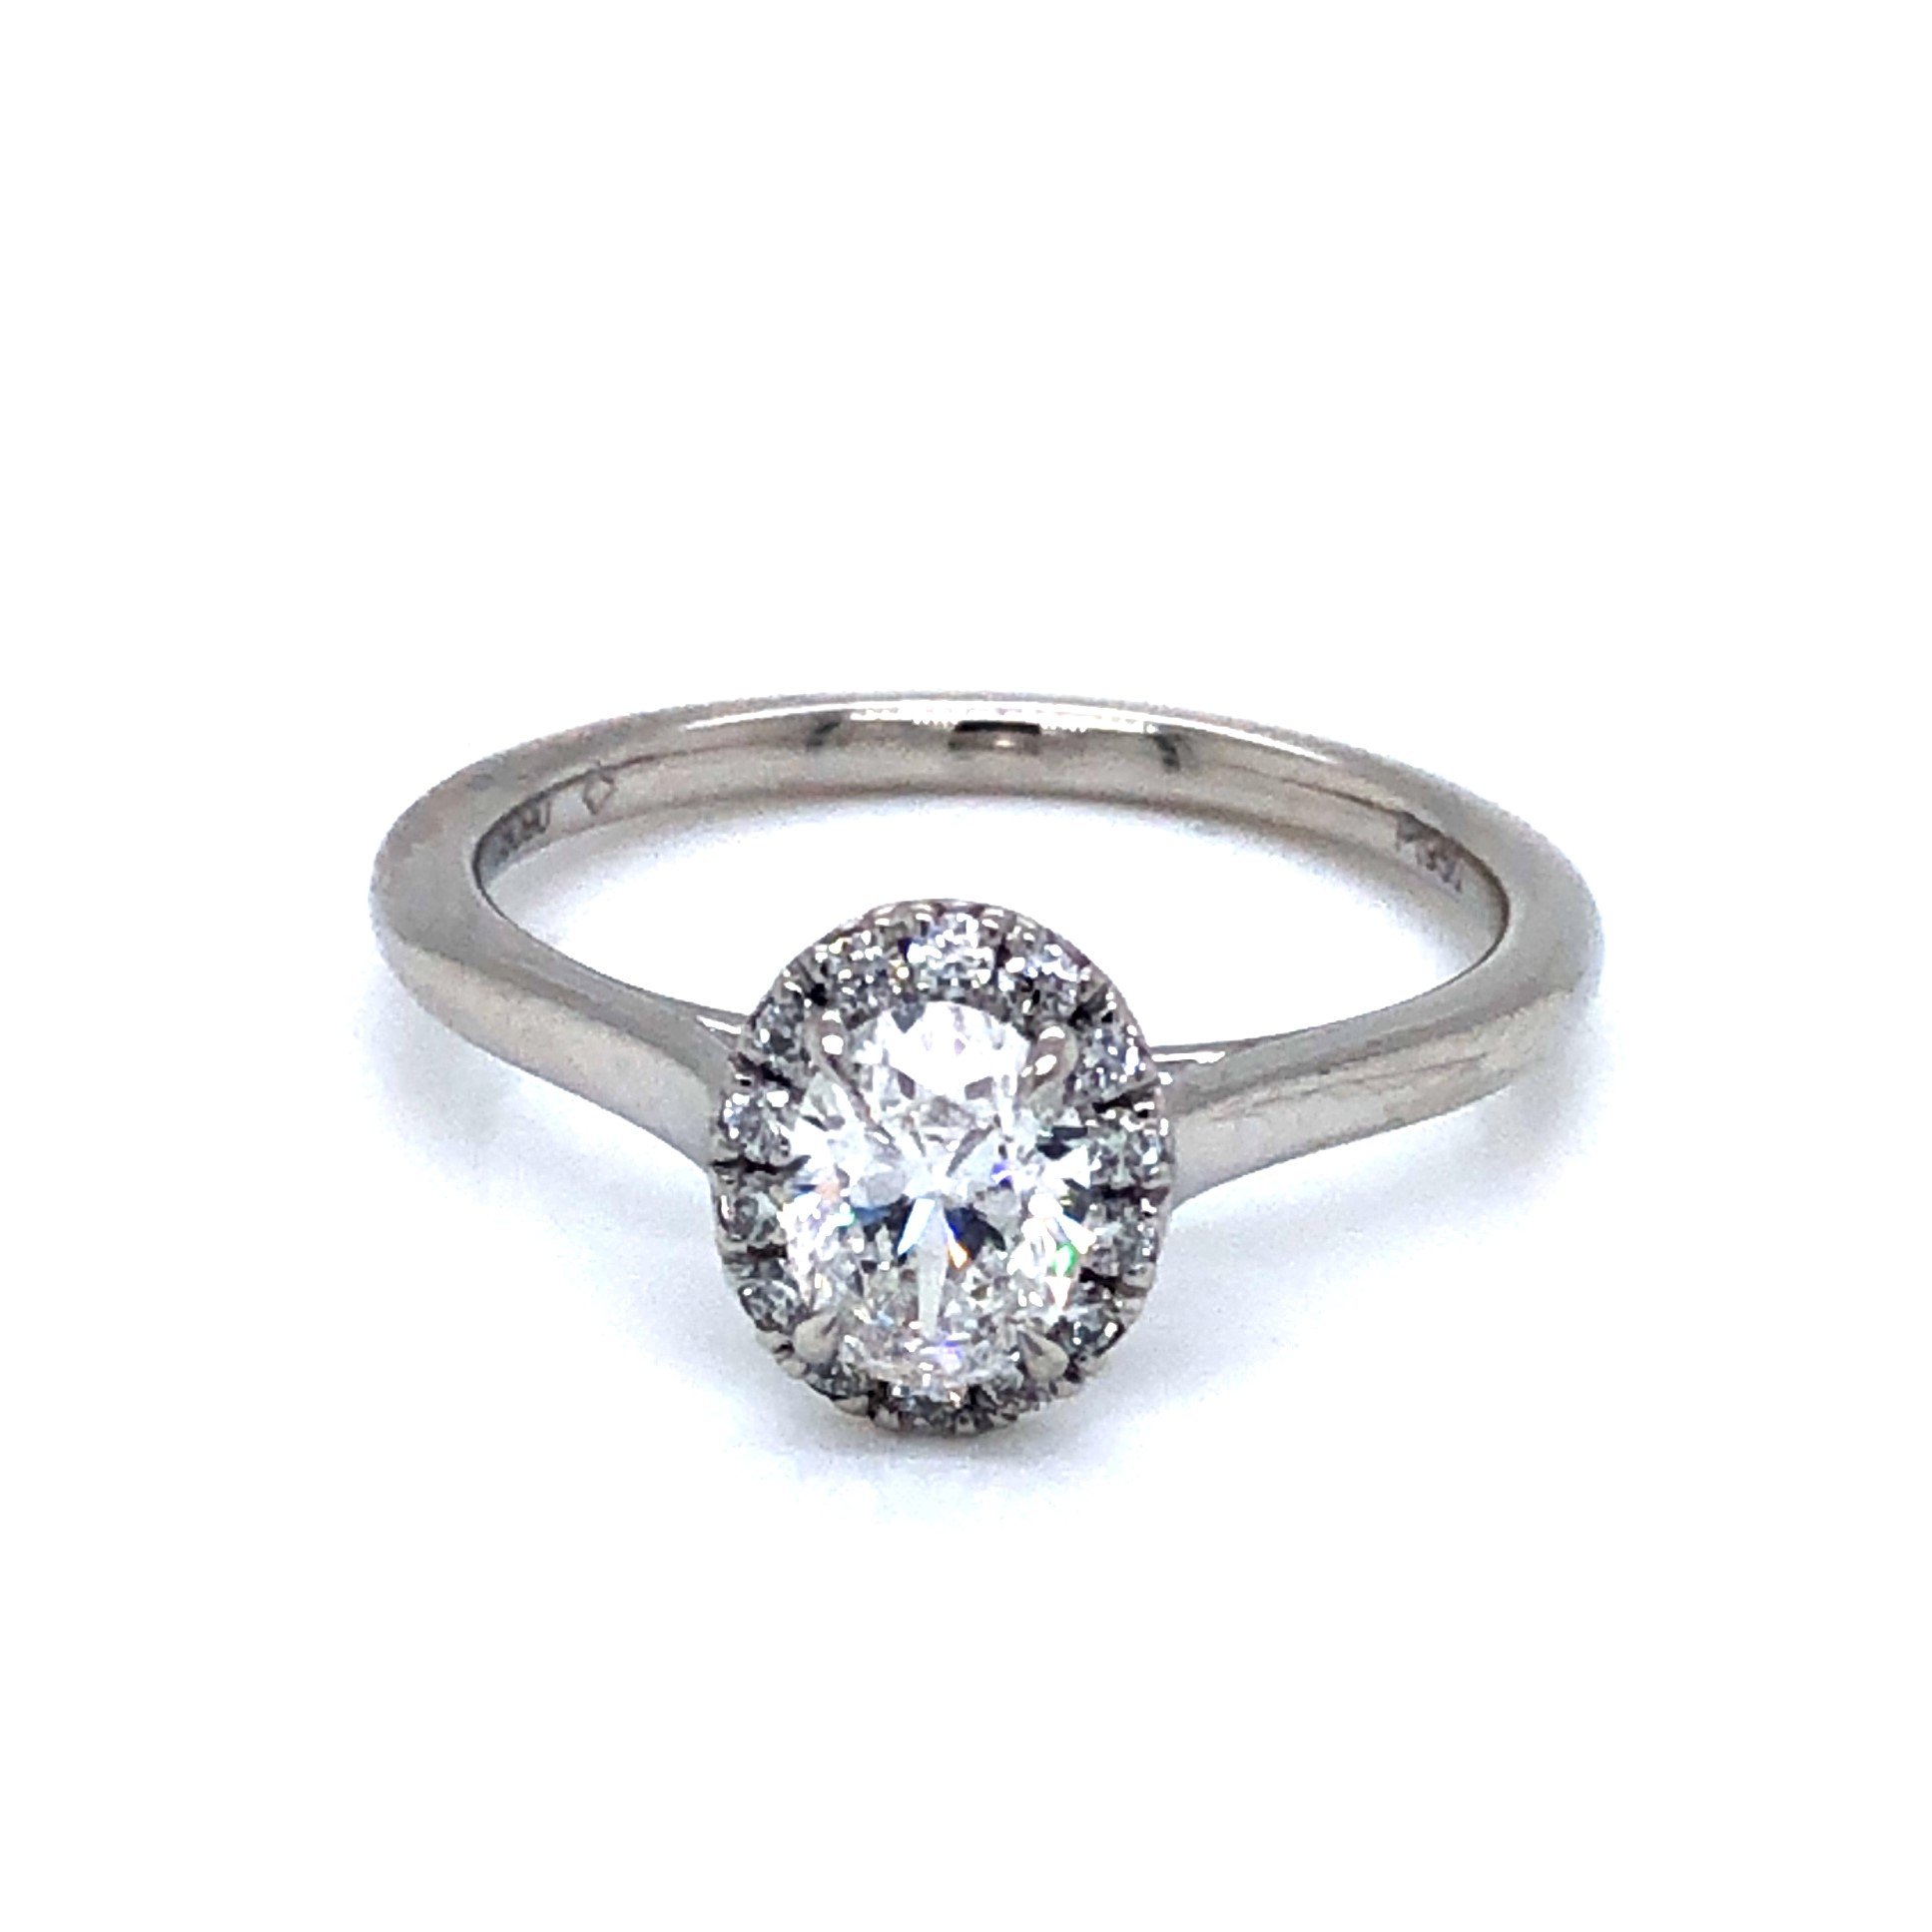 Lady s Platinum Engagement Ring With One 0.52Ct Oval F SI2 ForeverMark Diamond And 14=0.15Tw Round Brilliant G VS Diamonds